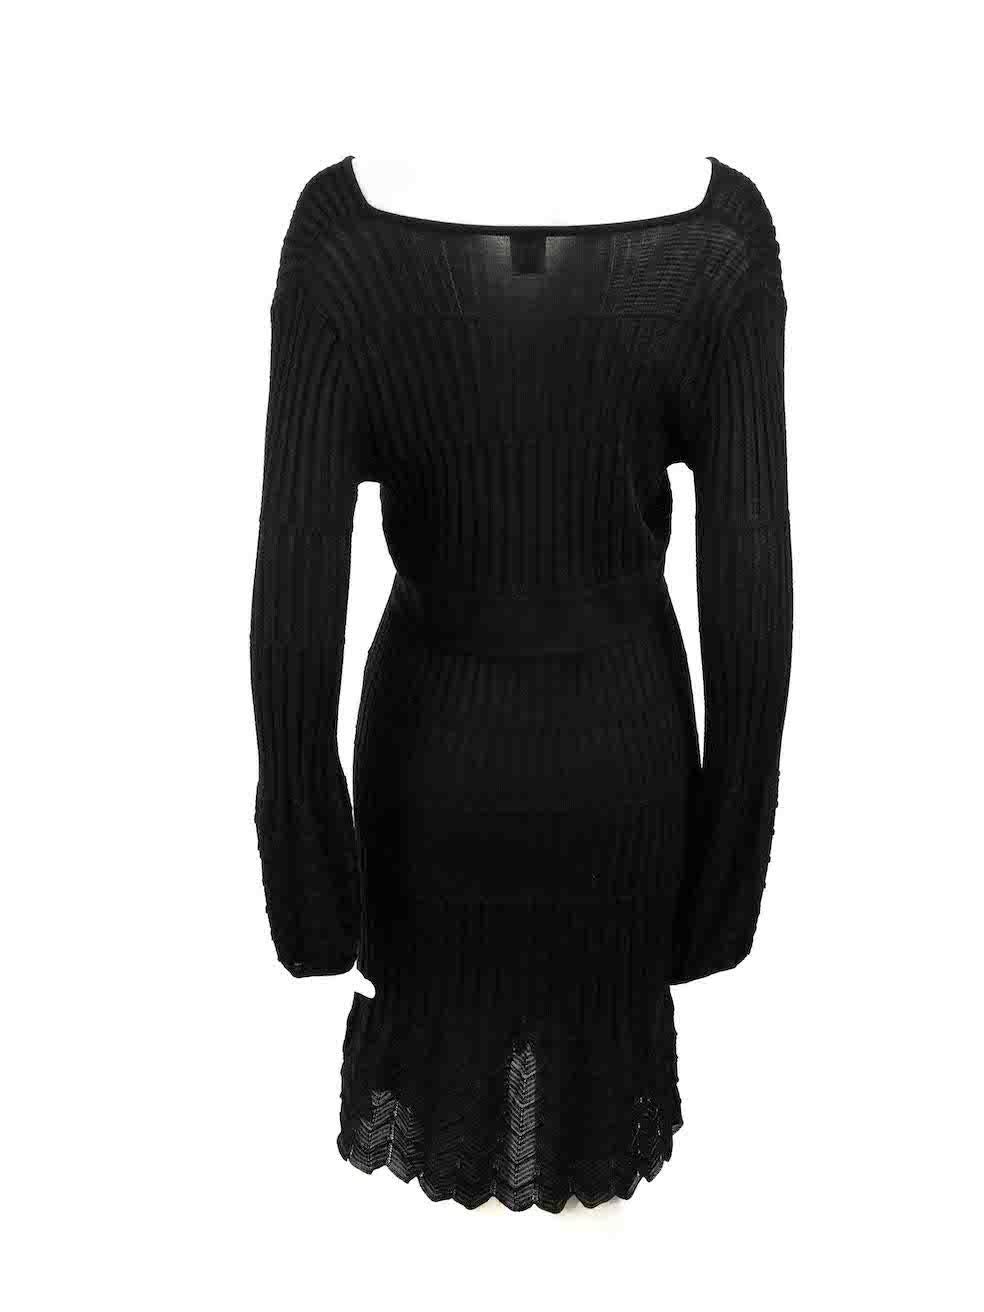 Missoni M Missoni Black Textured Knit Knee Length Dress Size L In Excellent Condition For Sale In London, GB